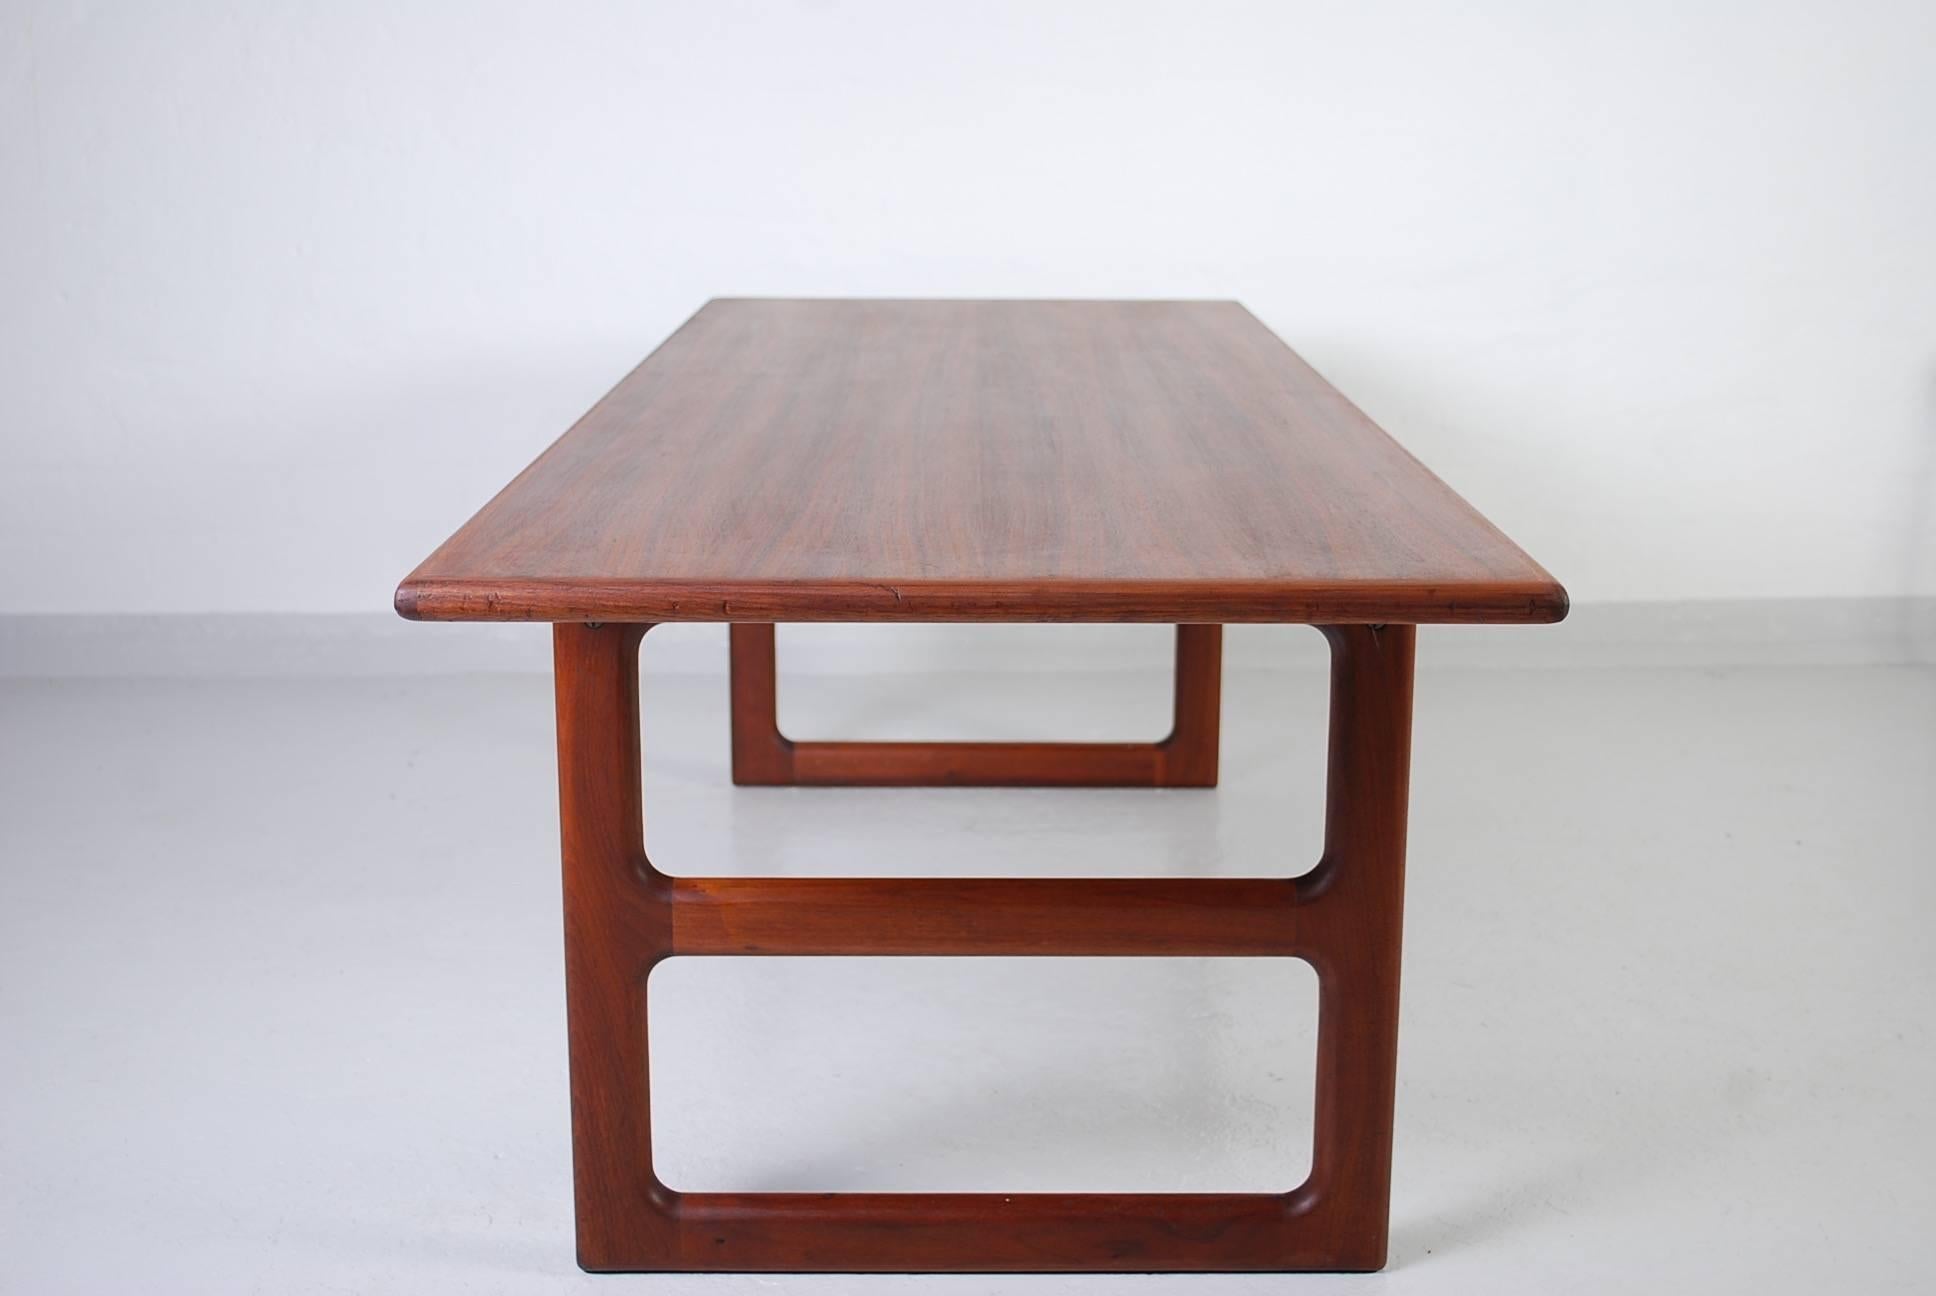 Mid-20th Century Midcentury Danish Teak Coffee Table with Sculptured Legs For Sale